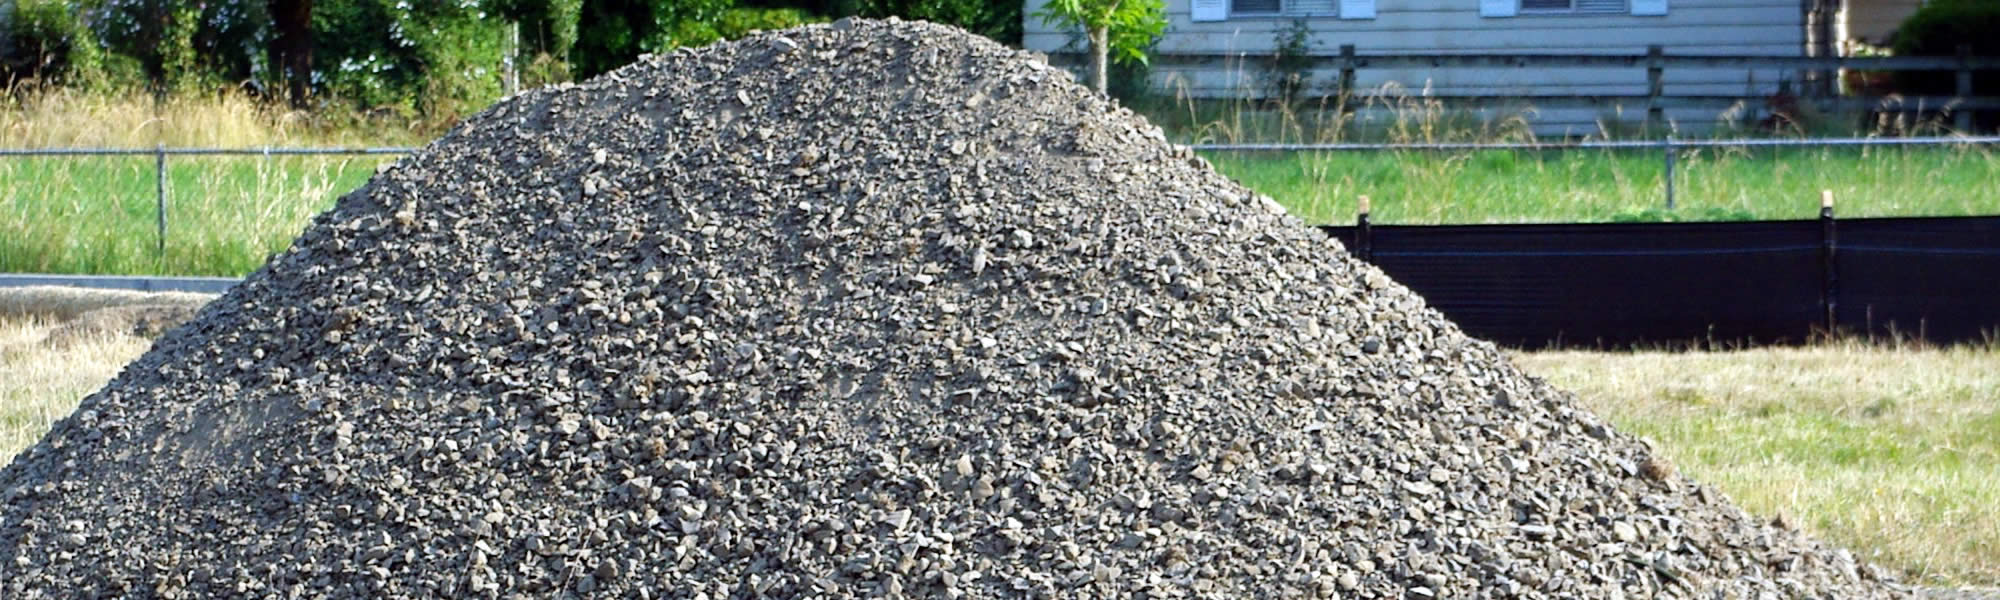 Suamico Gravel and Dirt Delivery Services near me